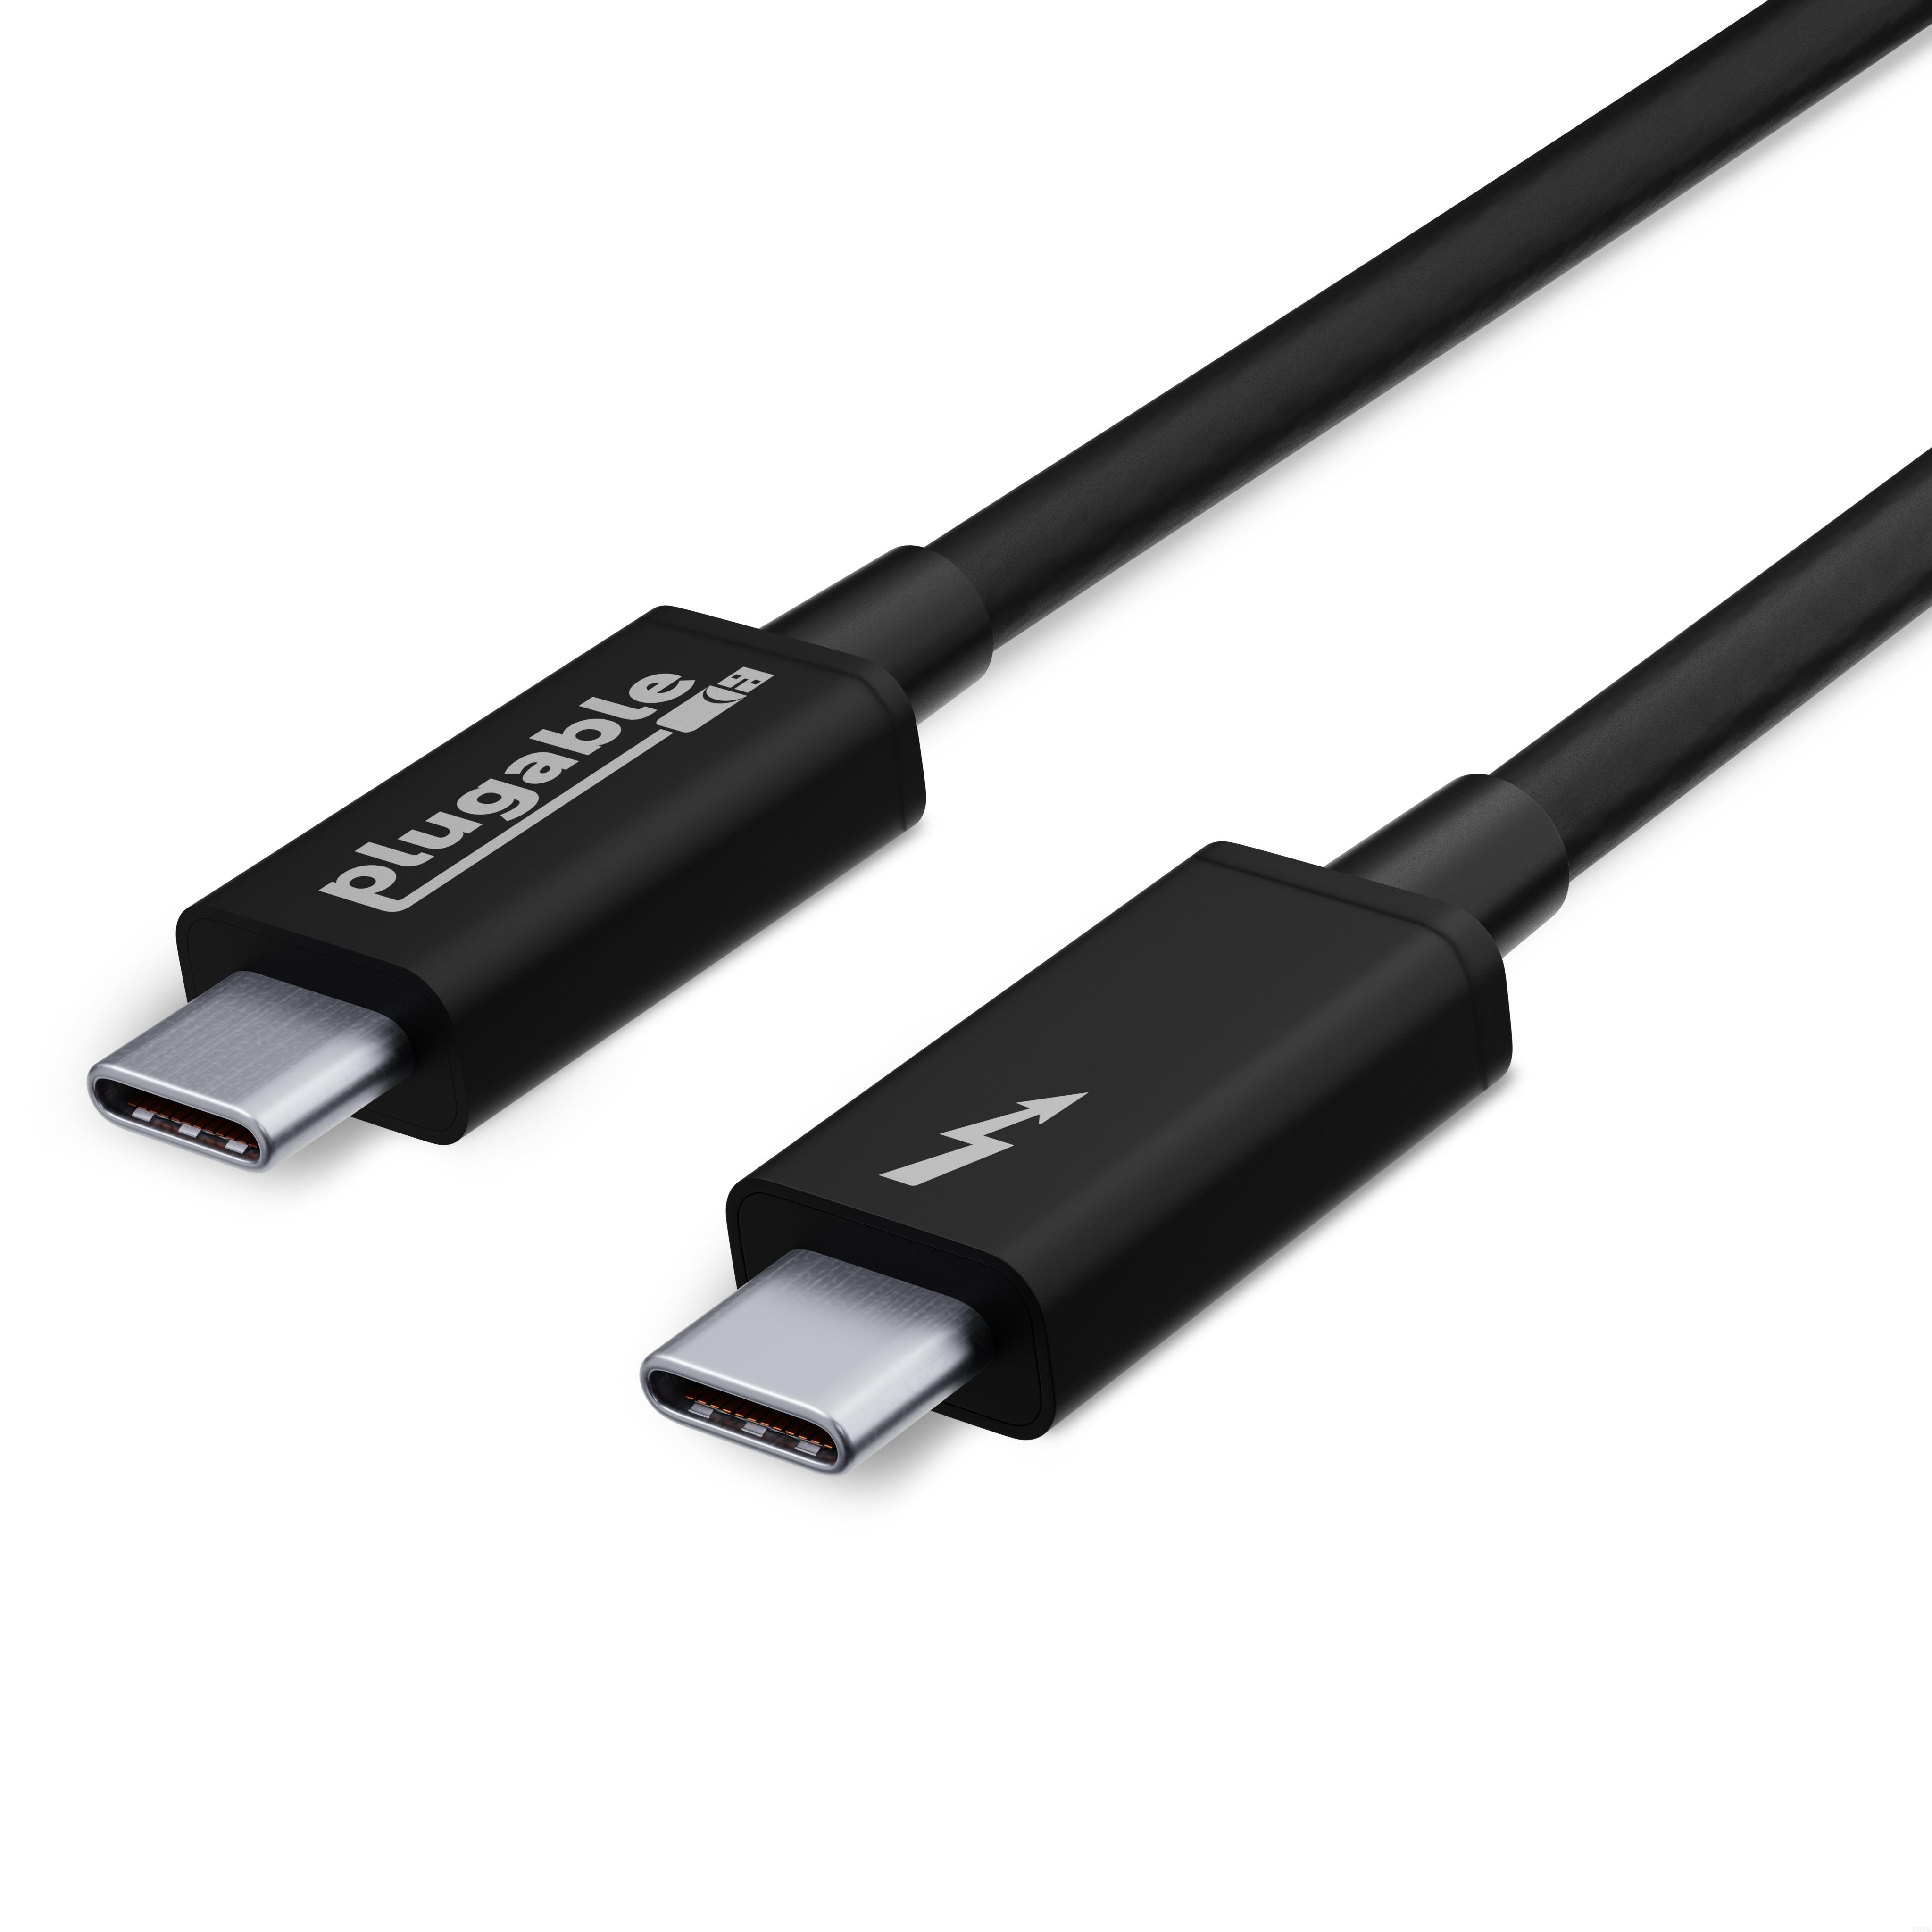 Plugable Thunderbolt 3 Cable 20Gbps Supports 100W (20V, 5A) Charging, 6.6ft / 2m USB C Compatible [Thunderbolt 3 Certified] - Driverless - image 1 of 3